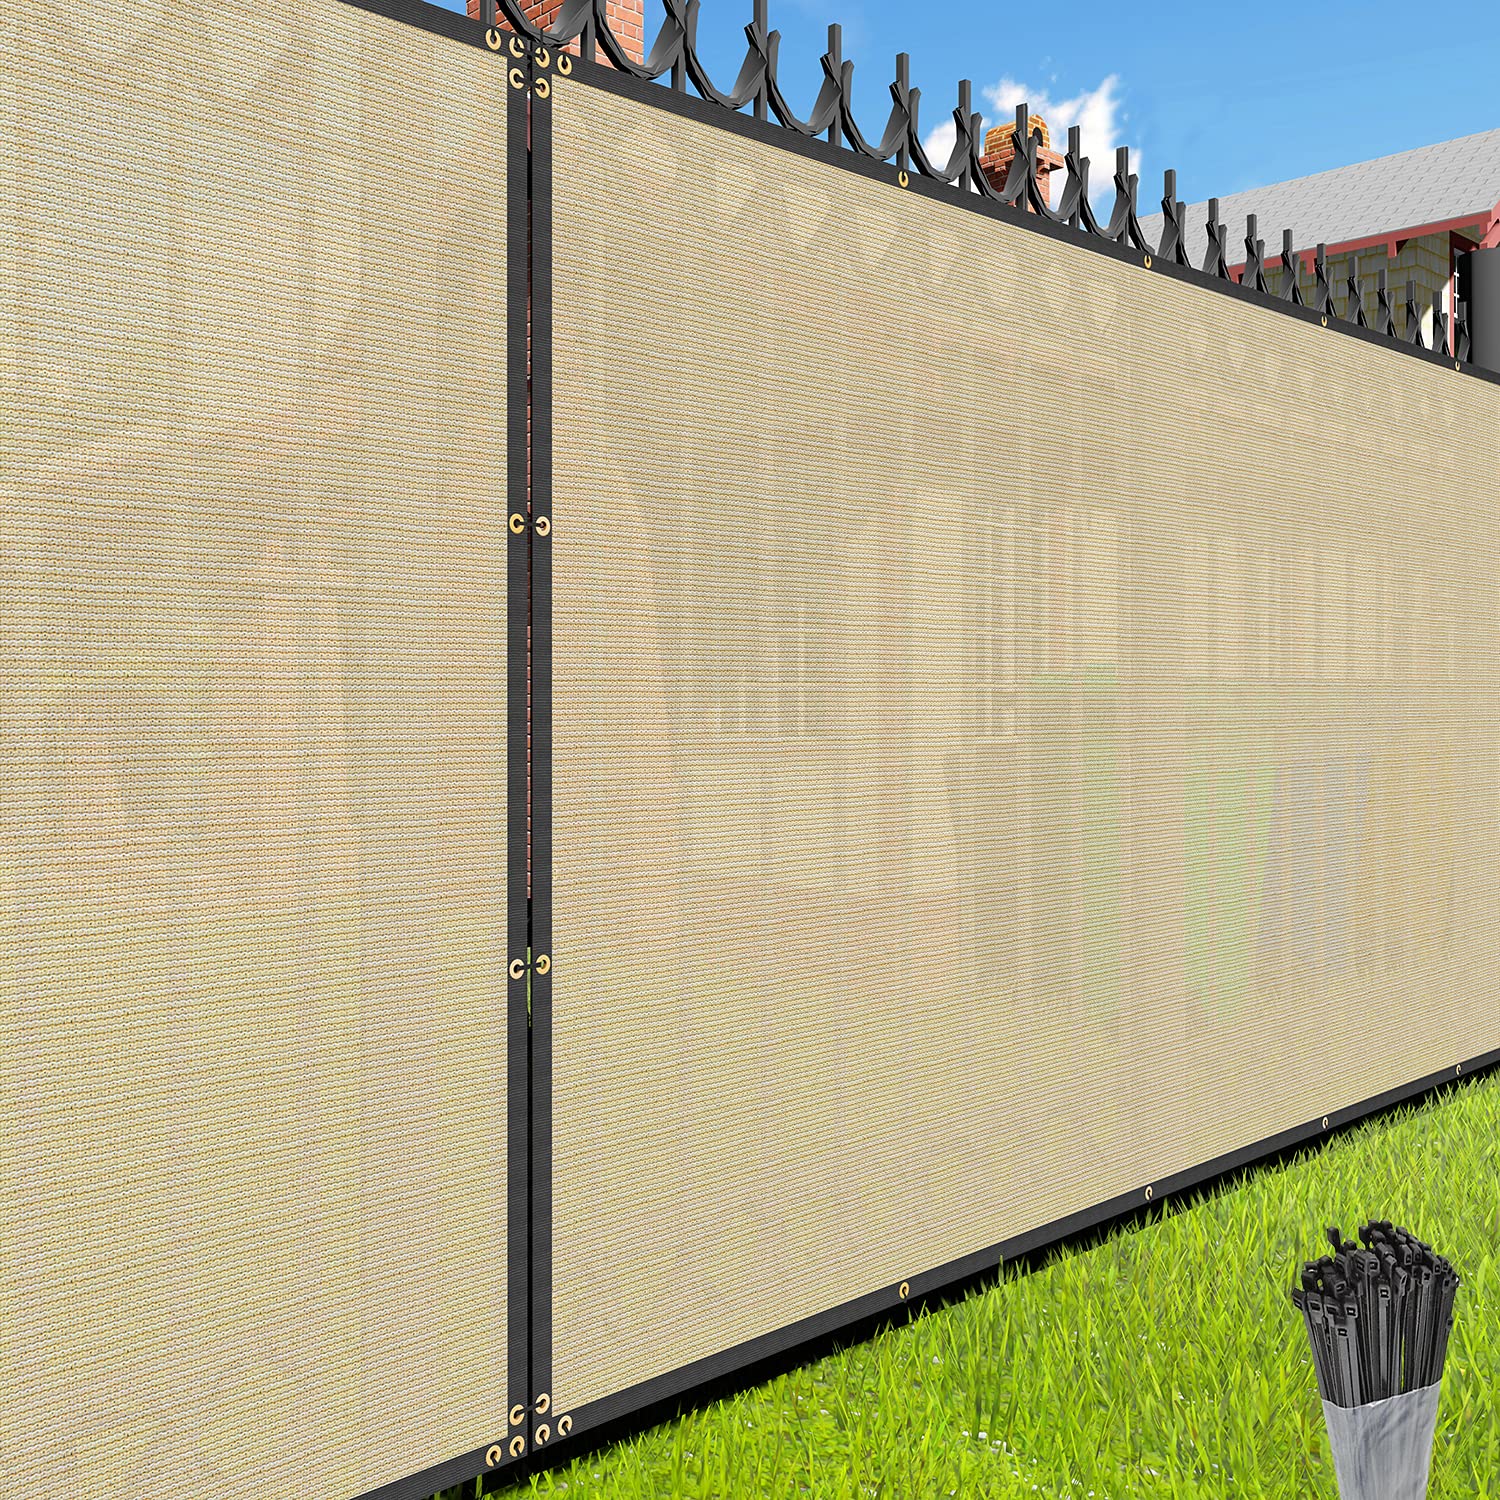 EK Sunrise 6 x 25 Privacy Fence Screen with Grommets Outdoor Windscreen Fence Covering Privacy Screen UV Blockage for Bac